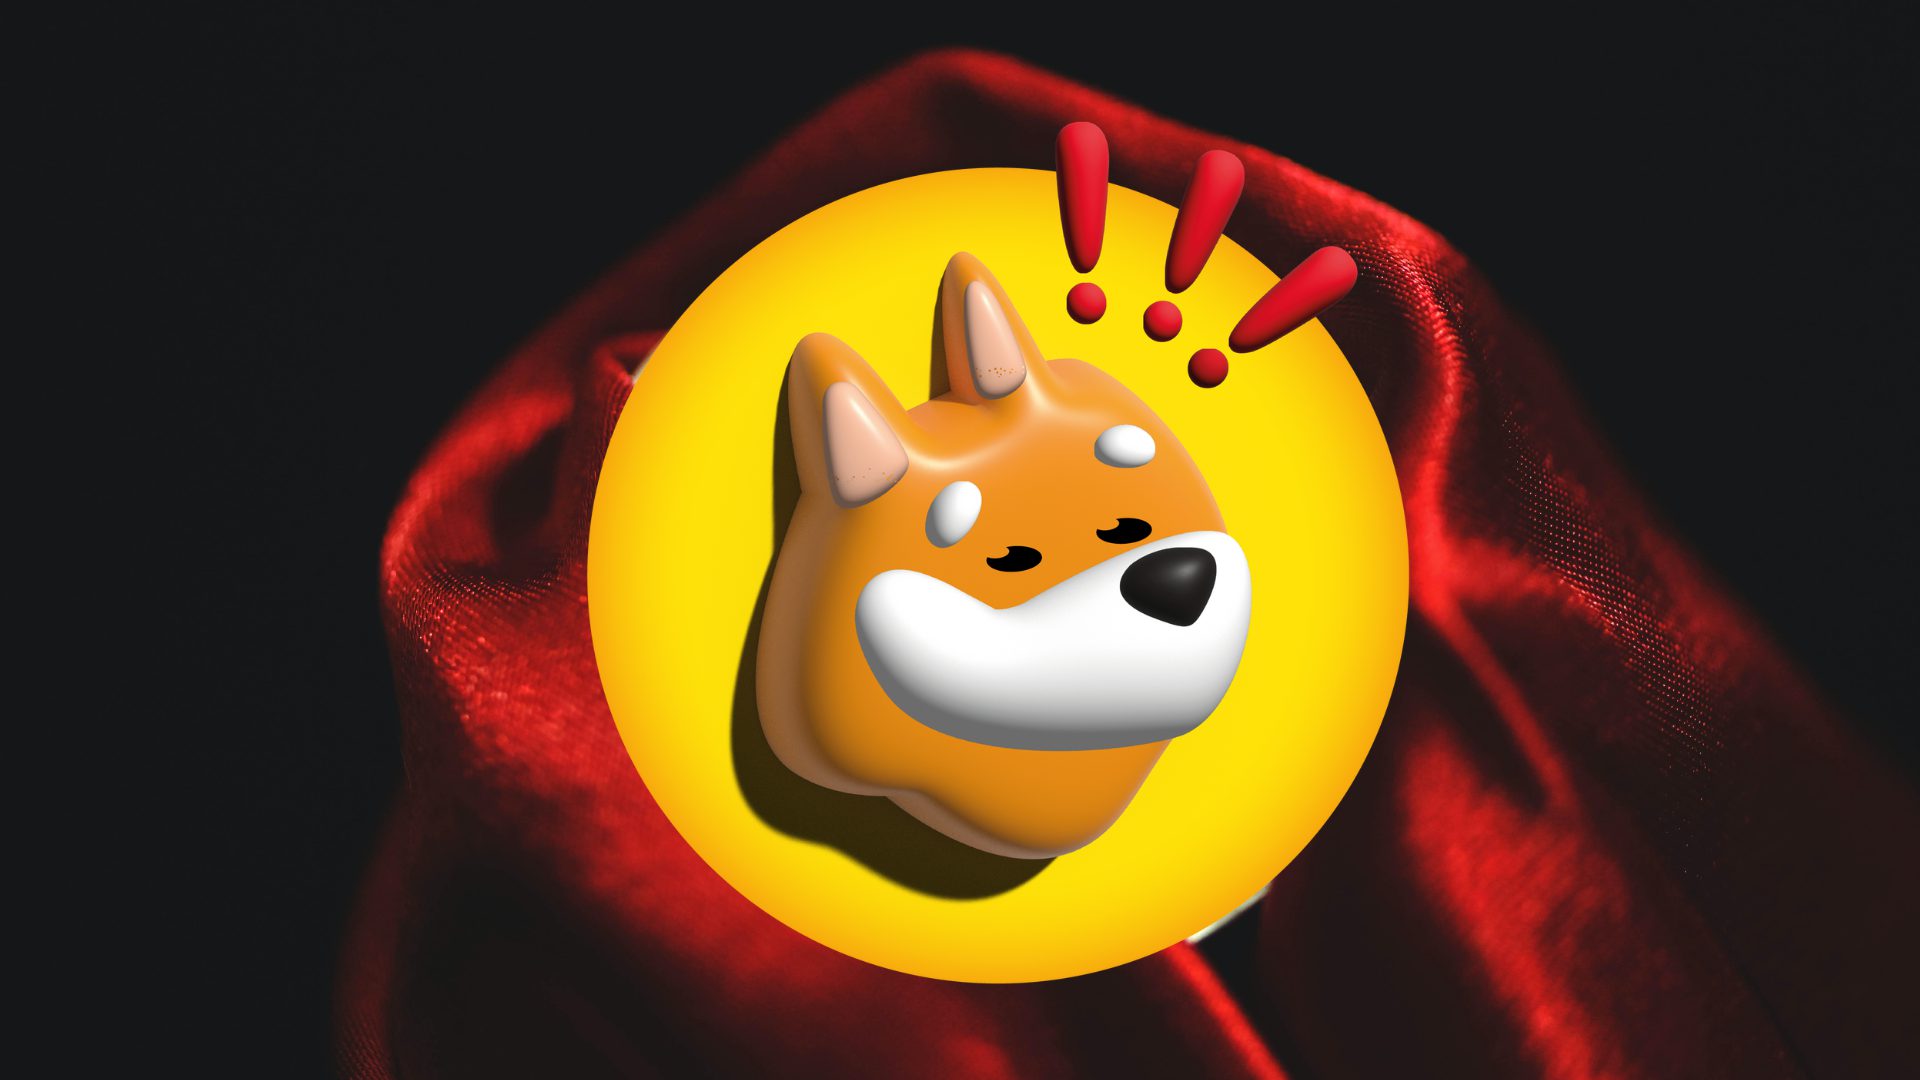 Bonk, dogwifhat, and Pepe Surge – Could Dogecoin20 Explode Next?